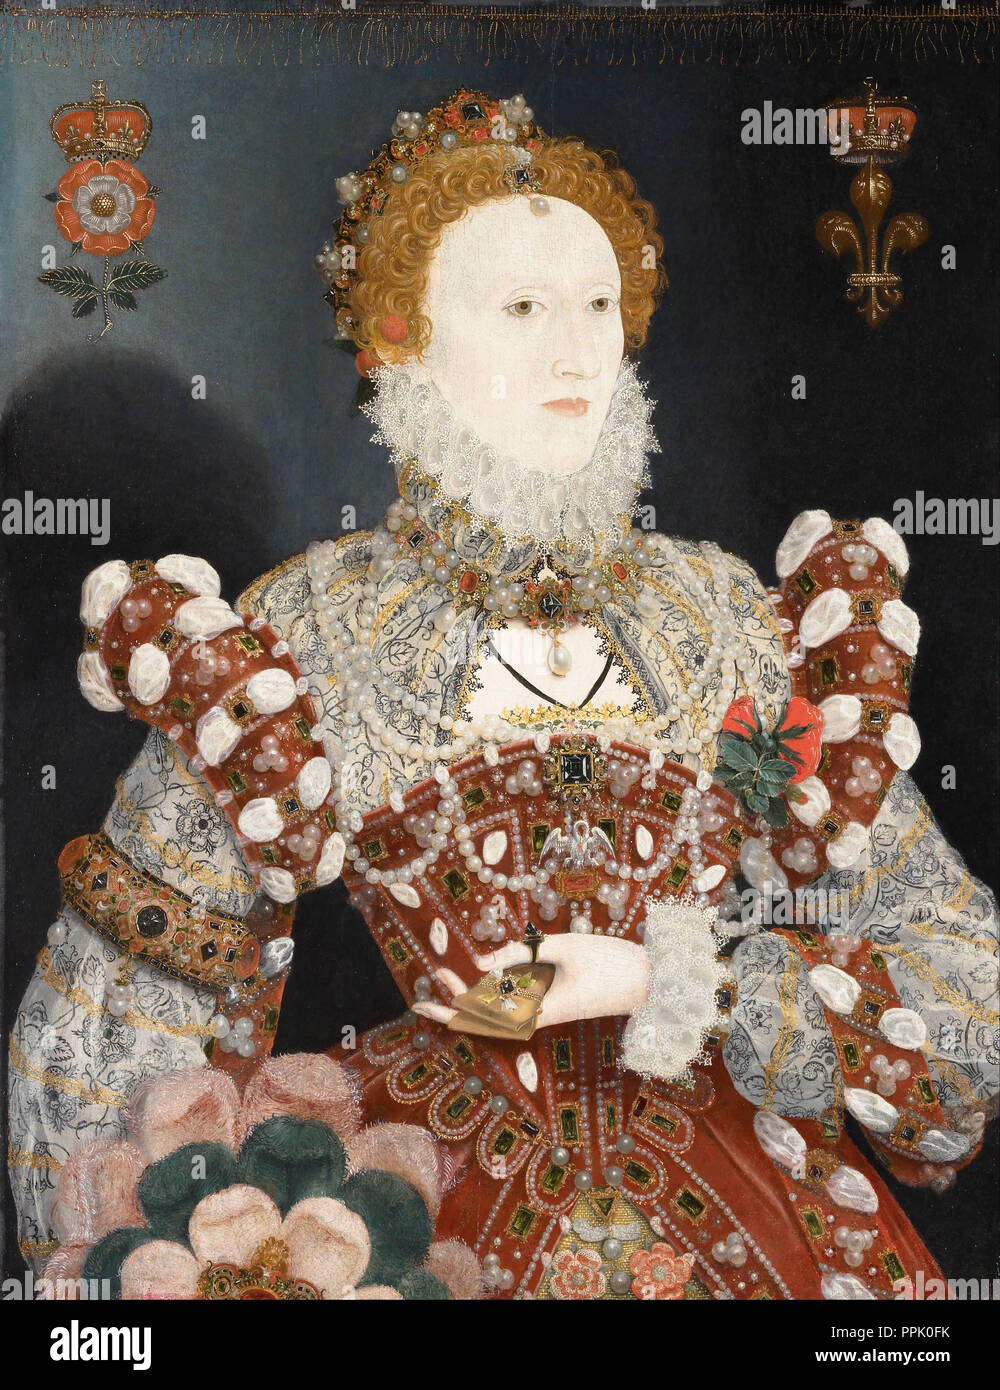 Portrait of Queen Elizabeth I. Date/Period: Ca. 1573 - ca. 1575. Oil on wood panel. Height: 787 mm (30.98 in); Width: 610 mm (24.01 in). Author: Nicholas Hilliard. Stock Photo